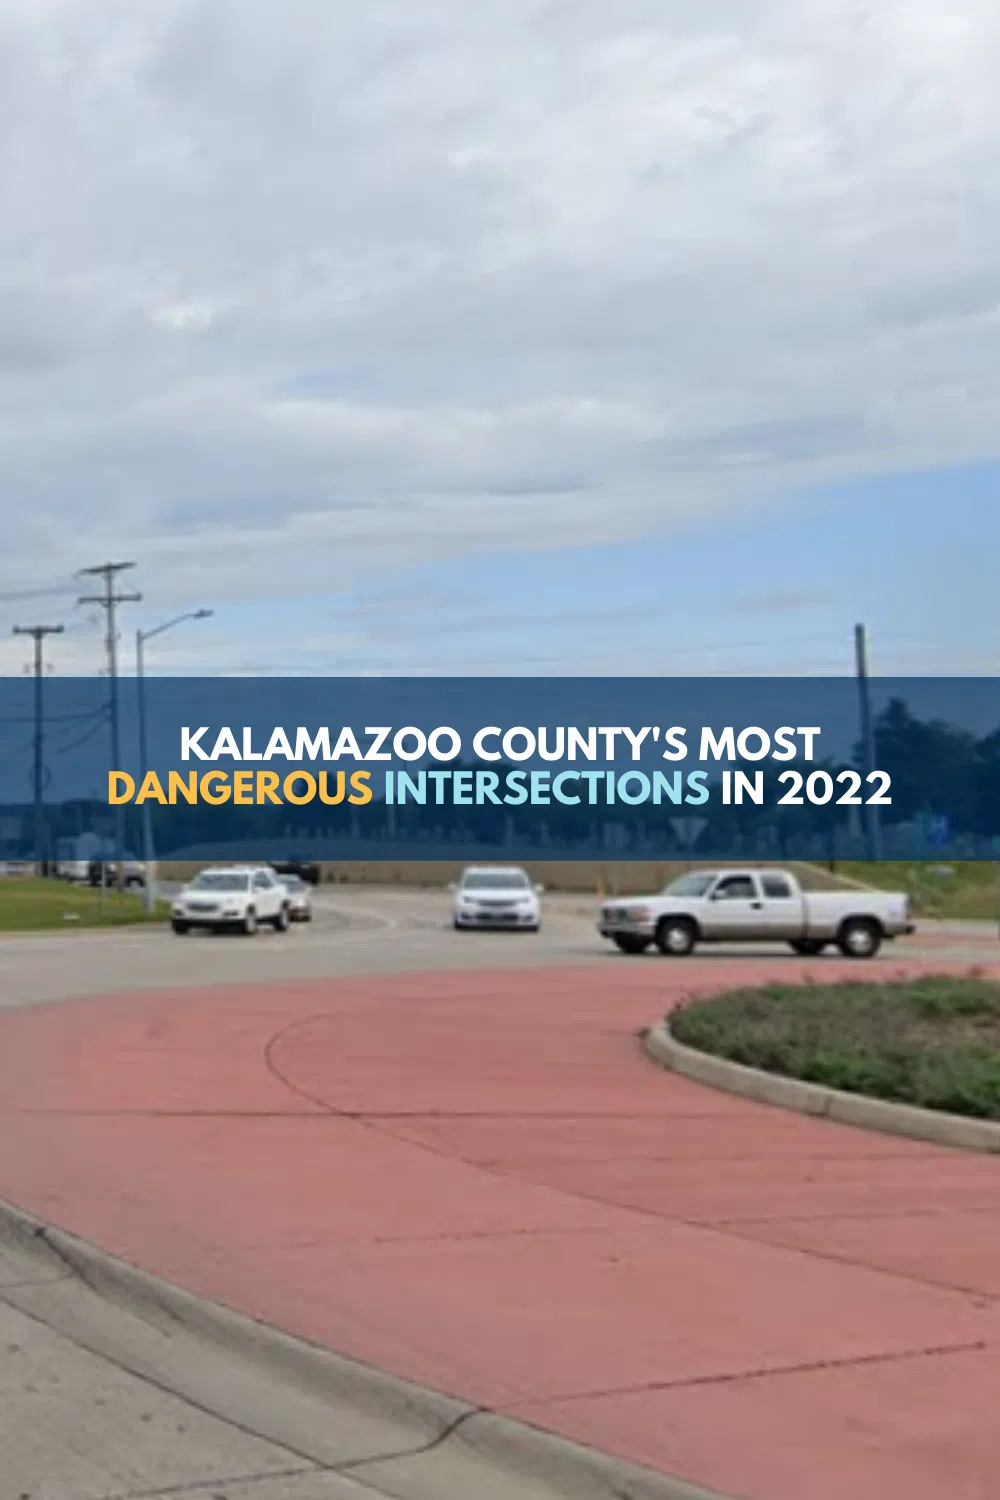 Kalamazoo County’s Most Dangerous Intersections in 2022